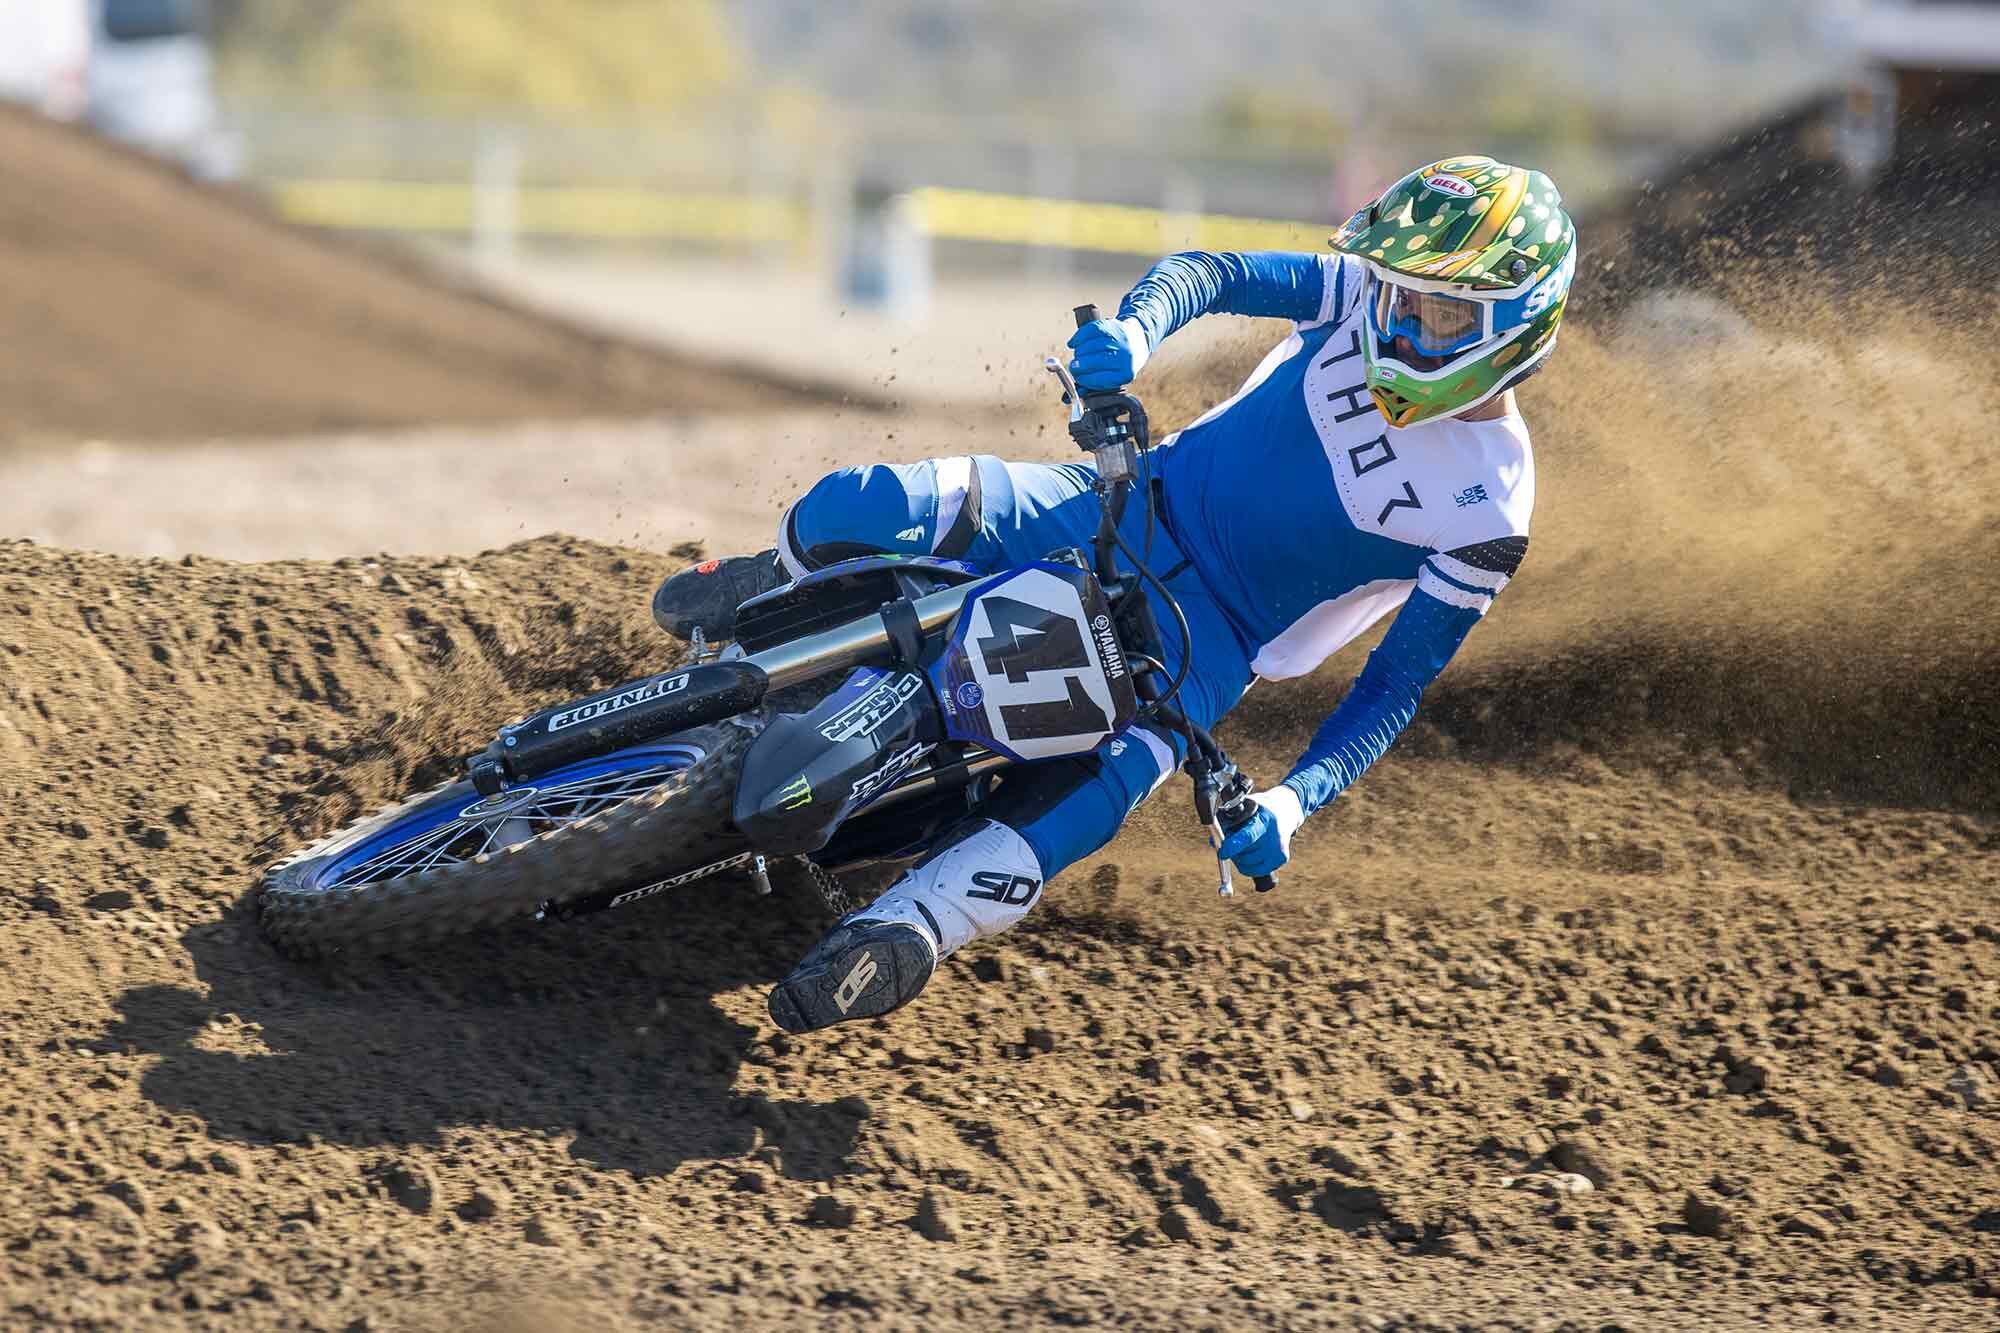 “I’ve waited many years for Yamaha to make the YZ450F slimmer. It’s so much better now.” <i>—Michael Wicker</i>